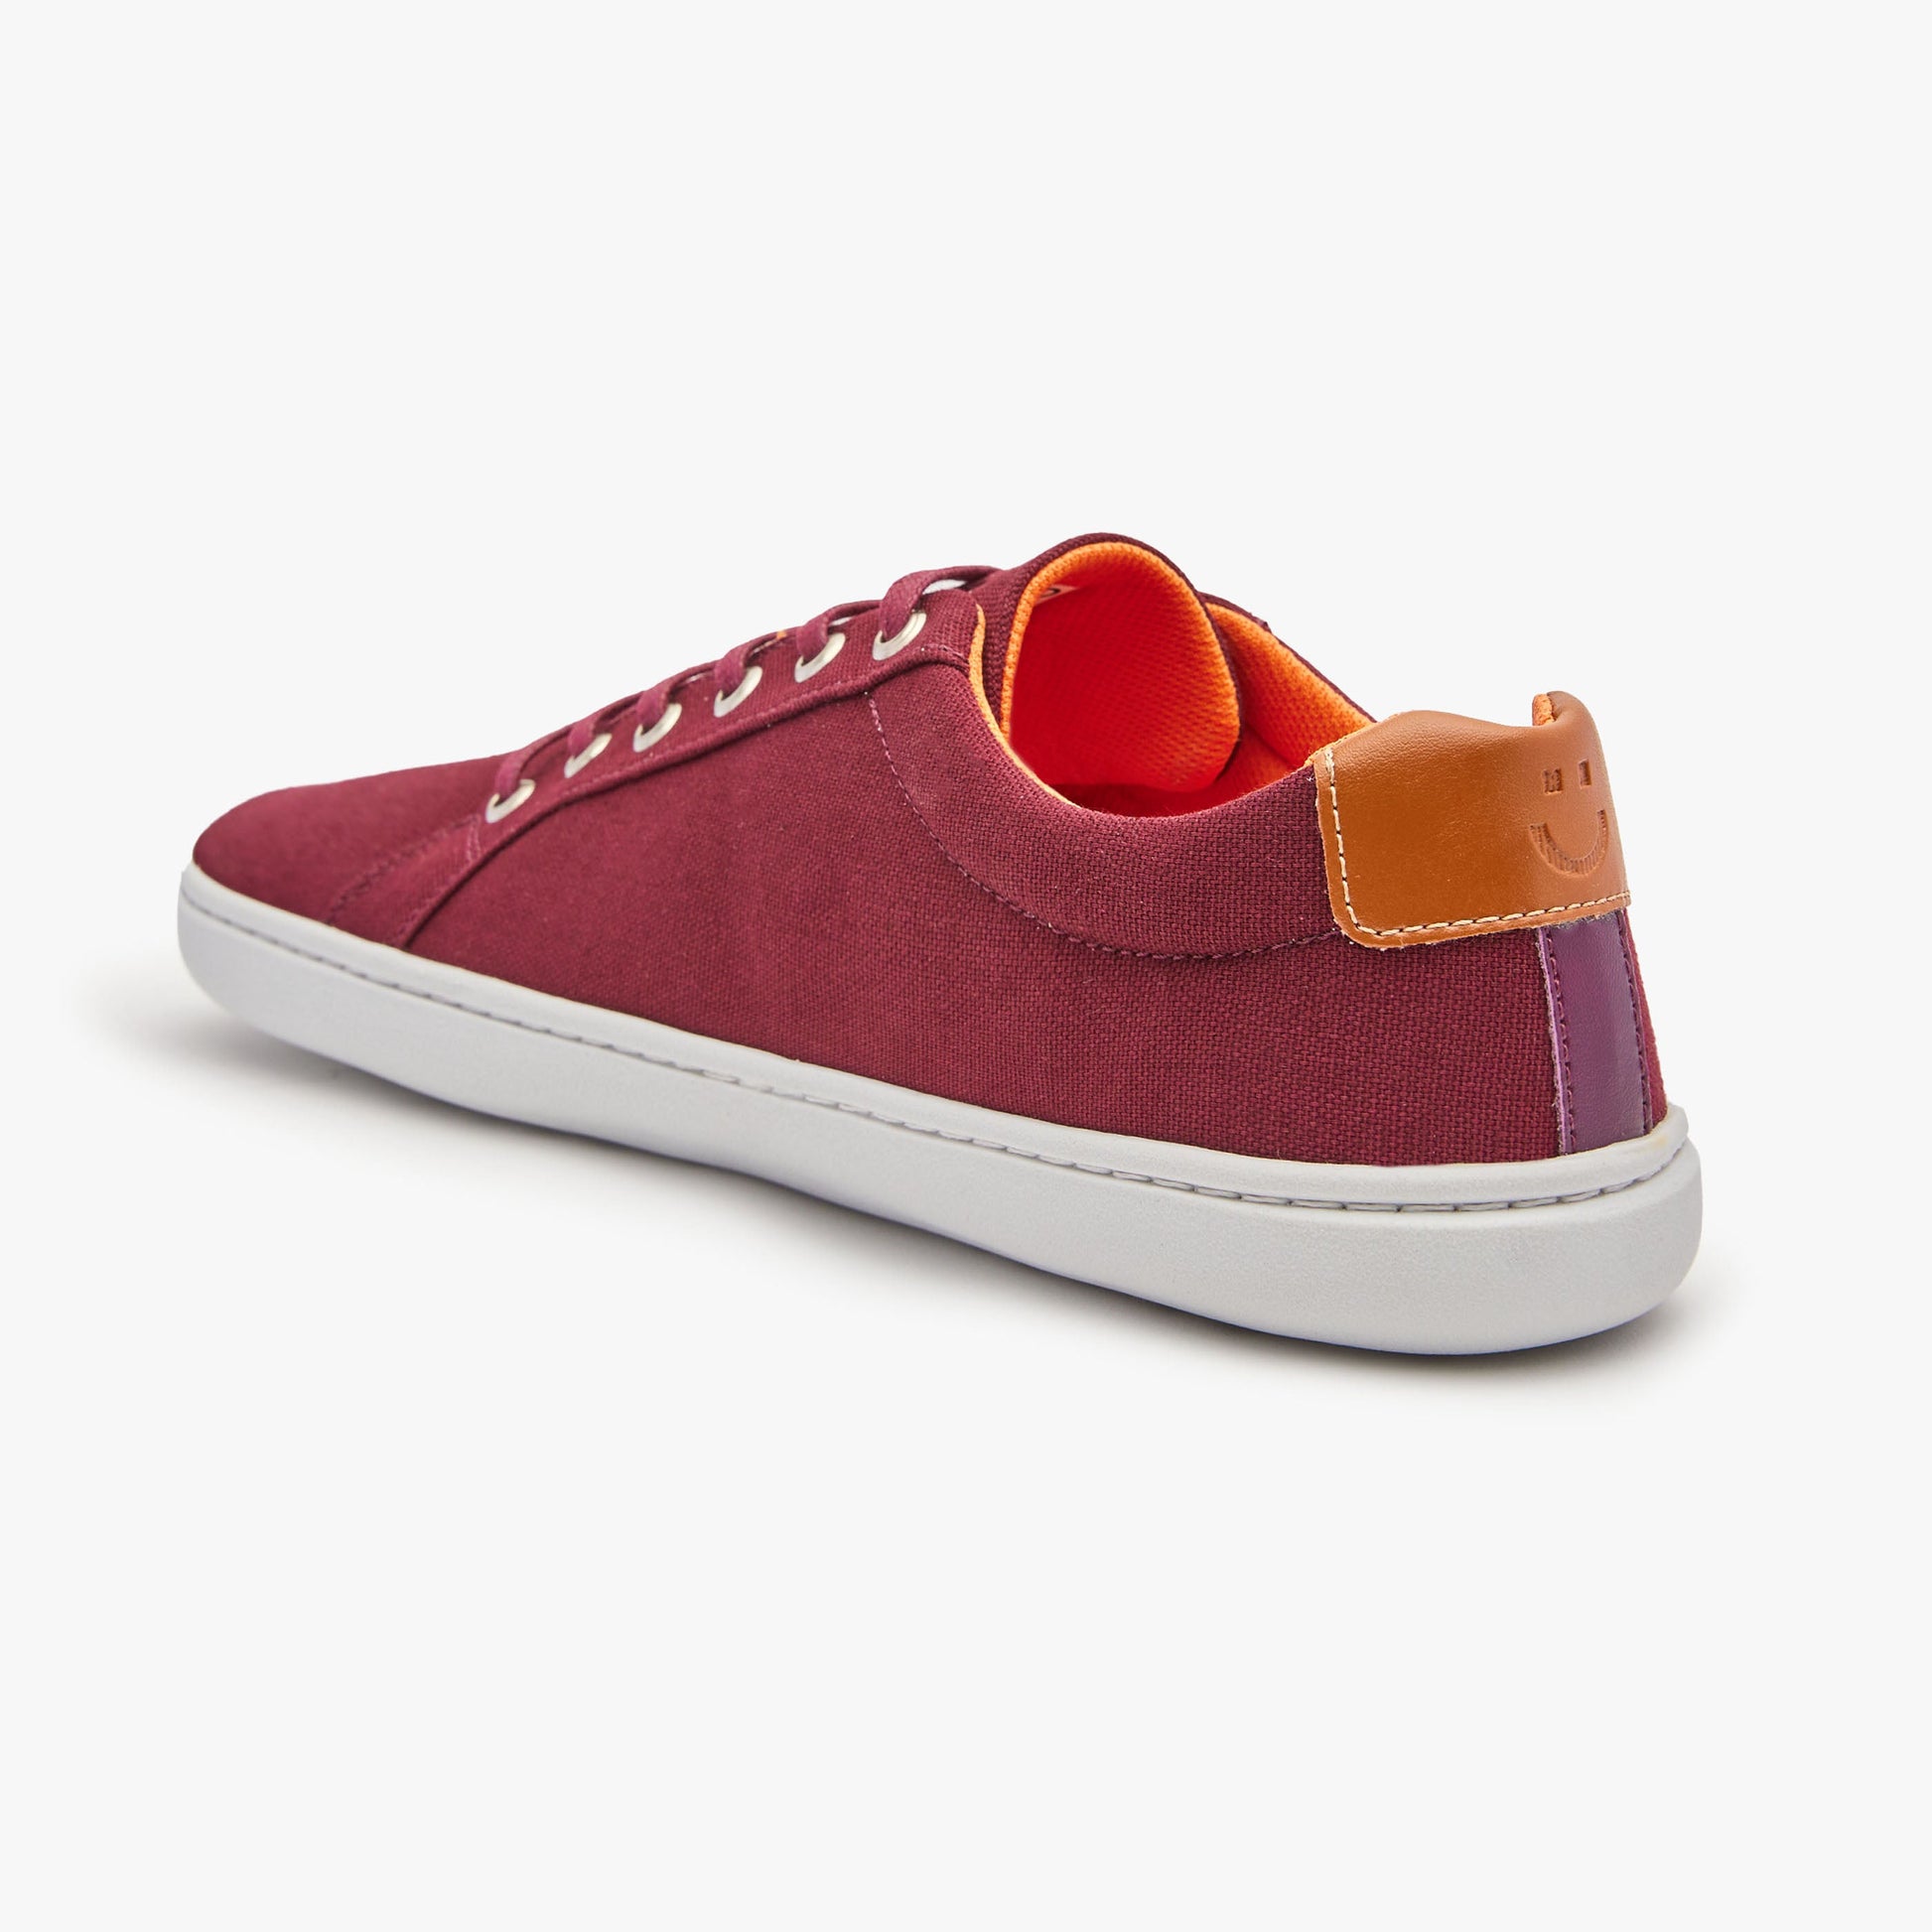 The Everyday Sneaker for Men | Gen 3 in Cotton Canvas-1